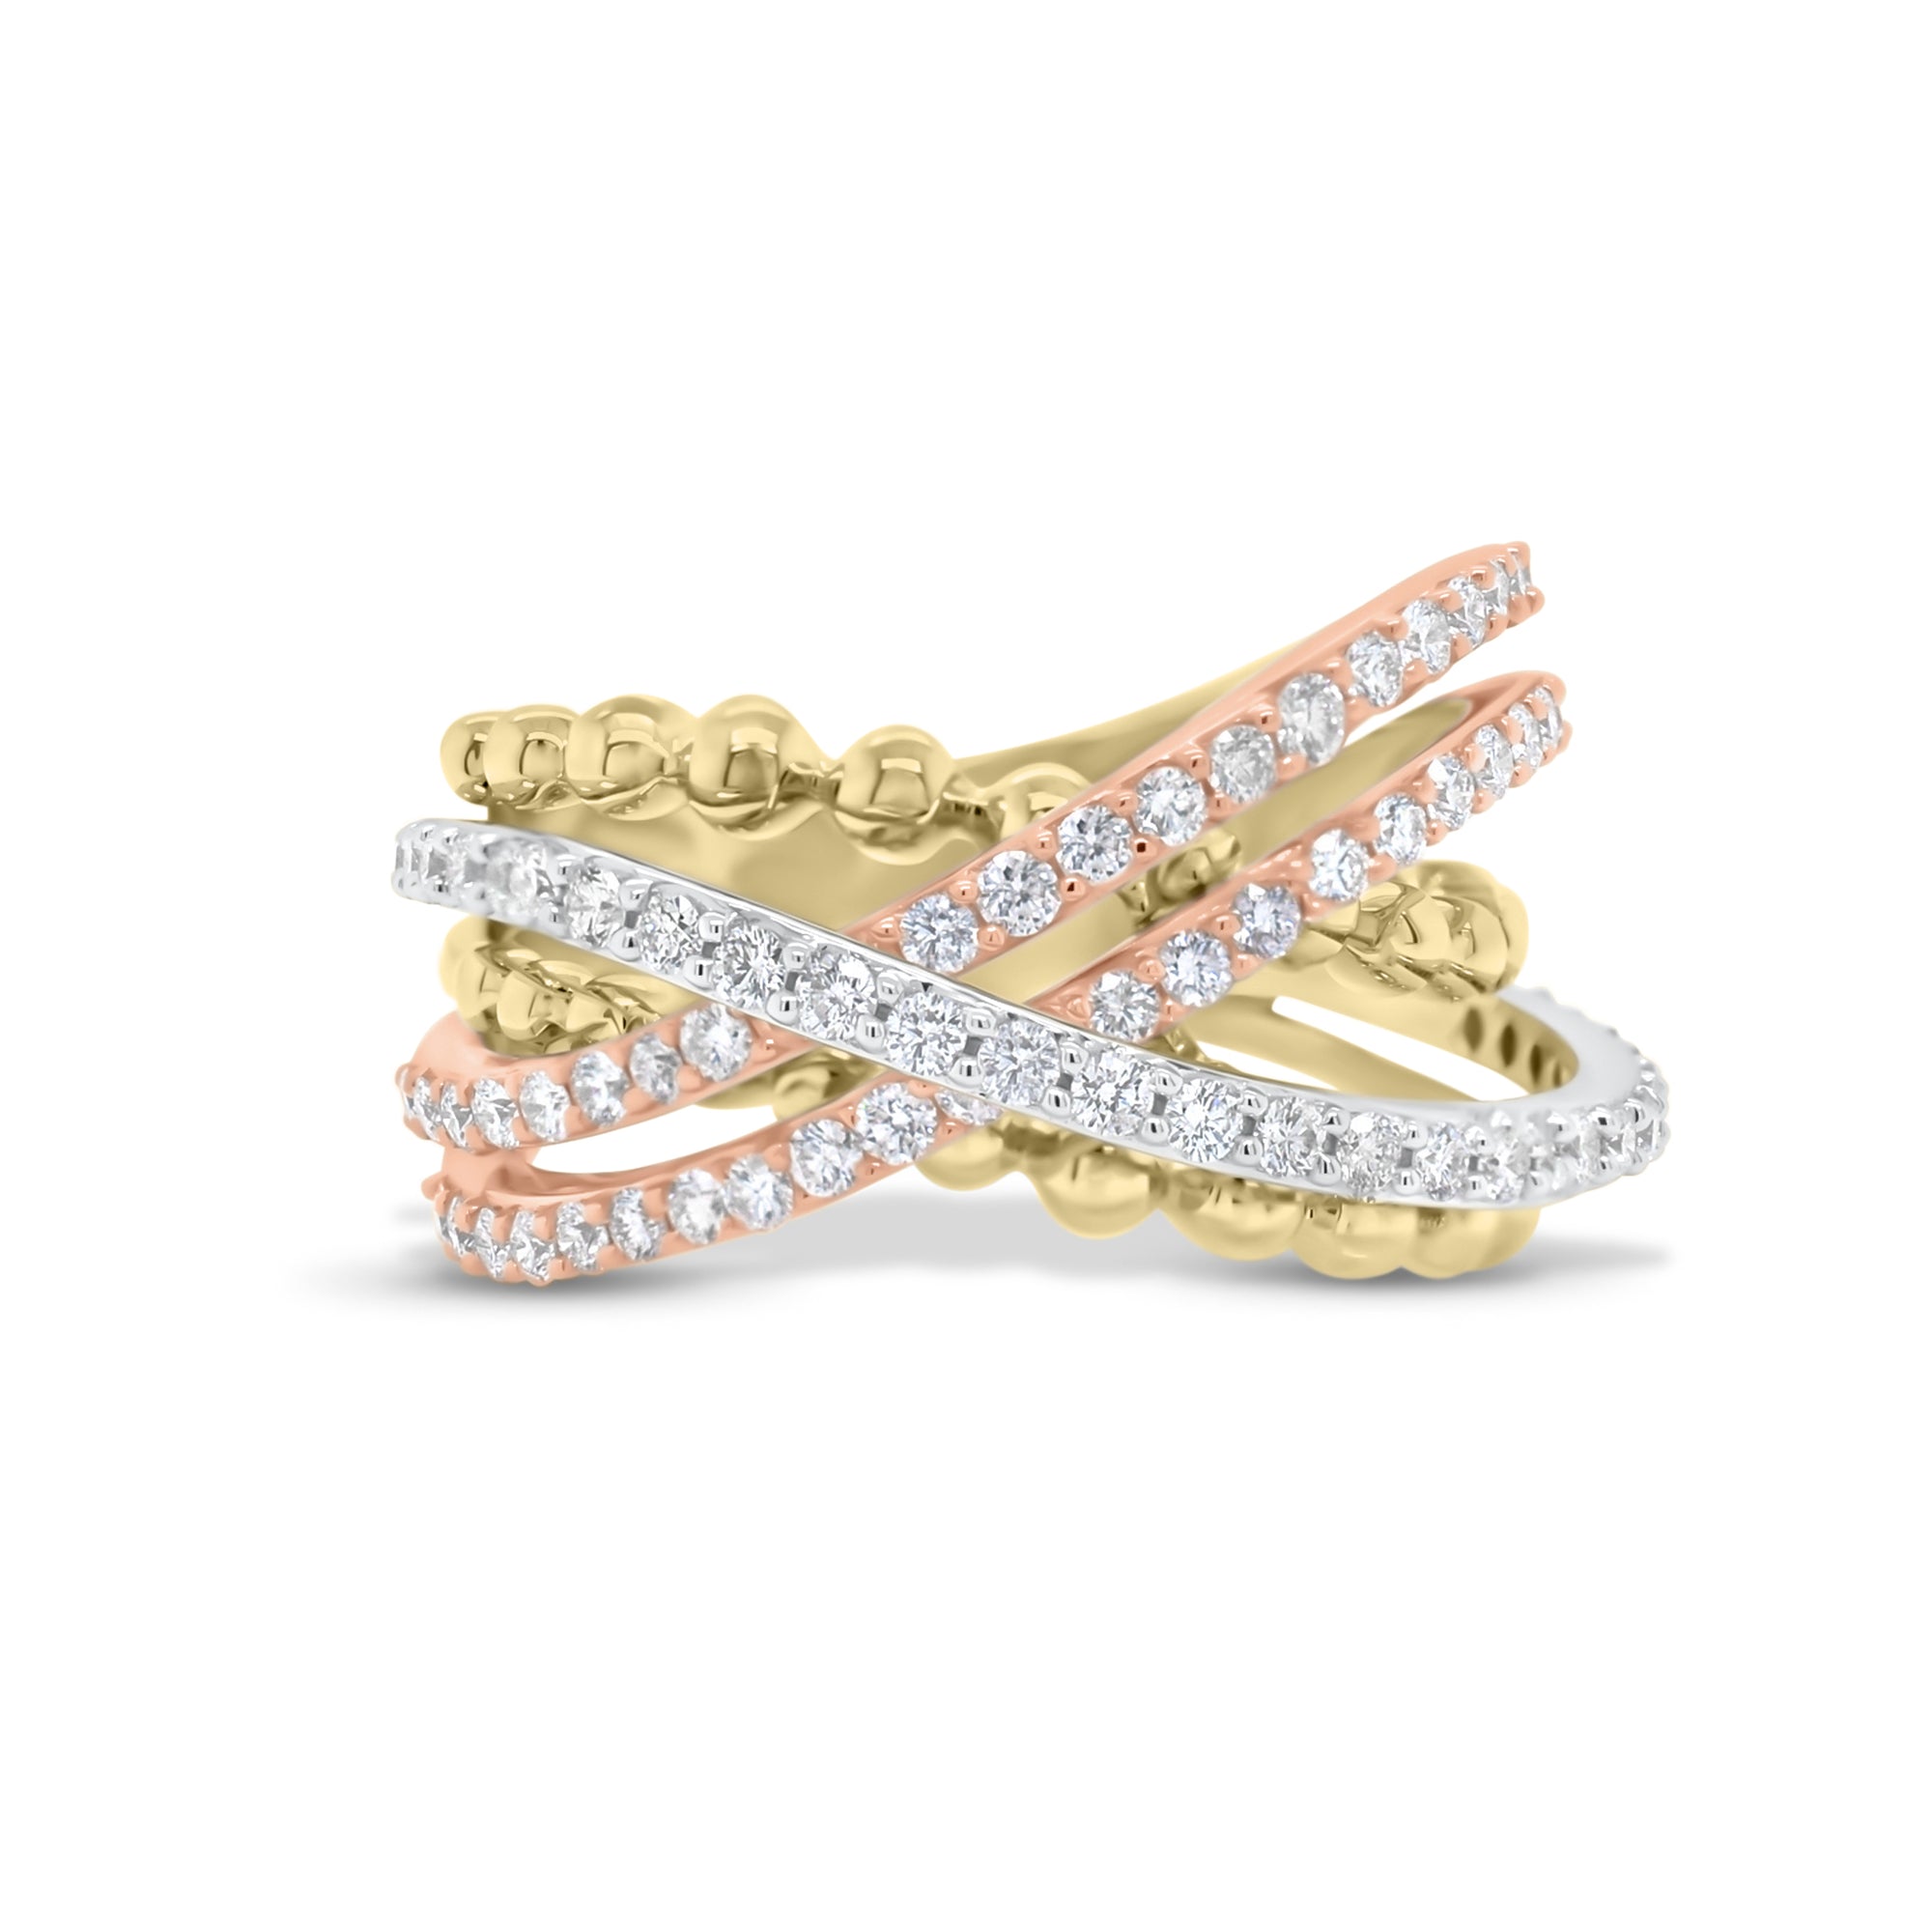 Diamond & Tricolor Gold Crossover Ring  - 18K gold weighing 8.72 grams  - 79 round diamonds totaling 0.95 carats